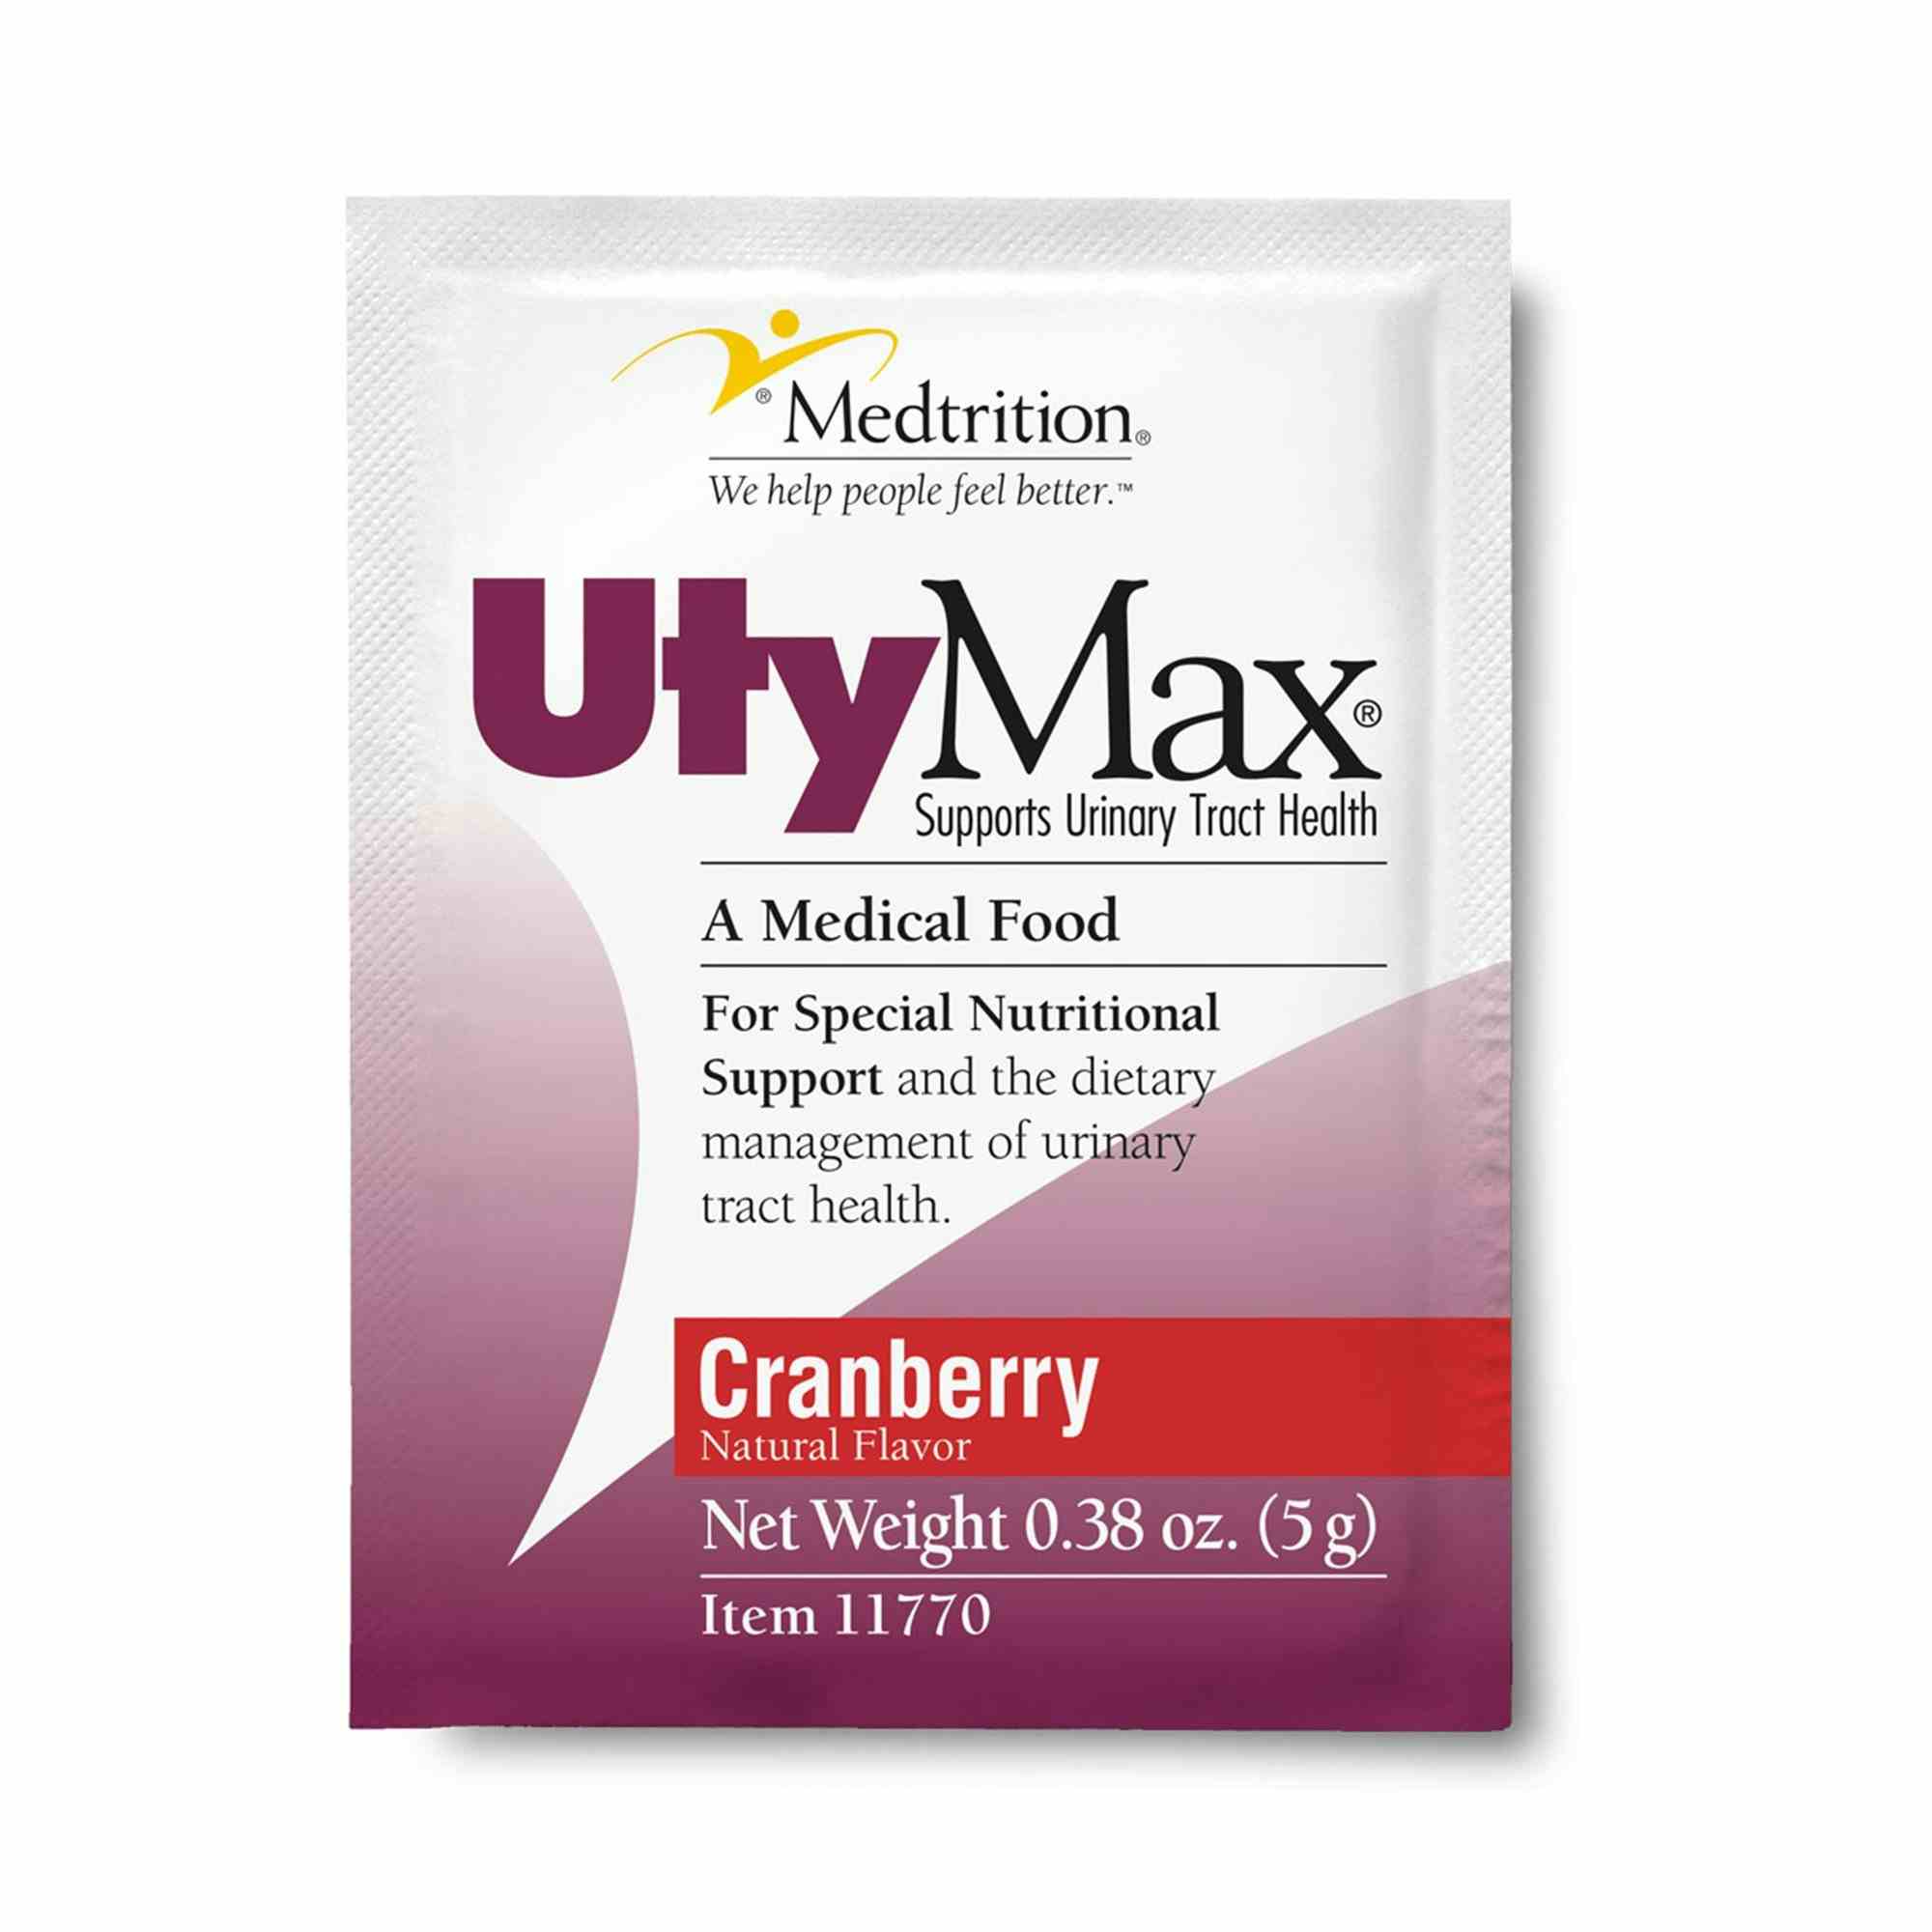 UtyMax Urinary Health Supplement, Cranberry, 5g, 11770, Case of 60